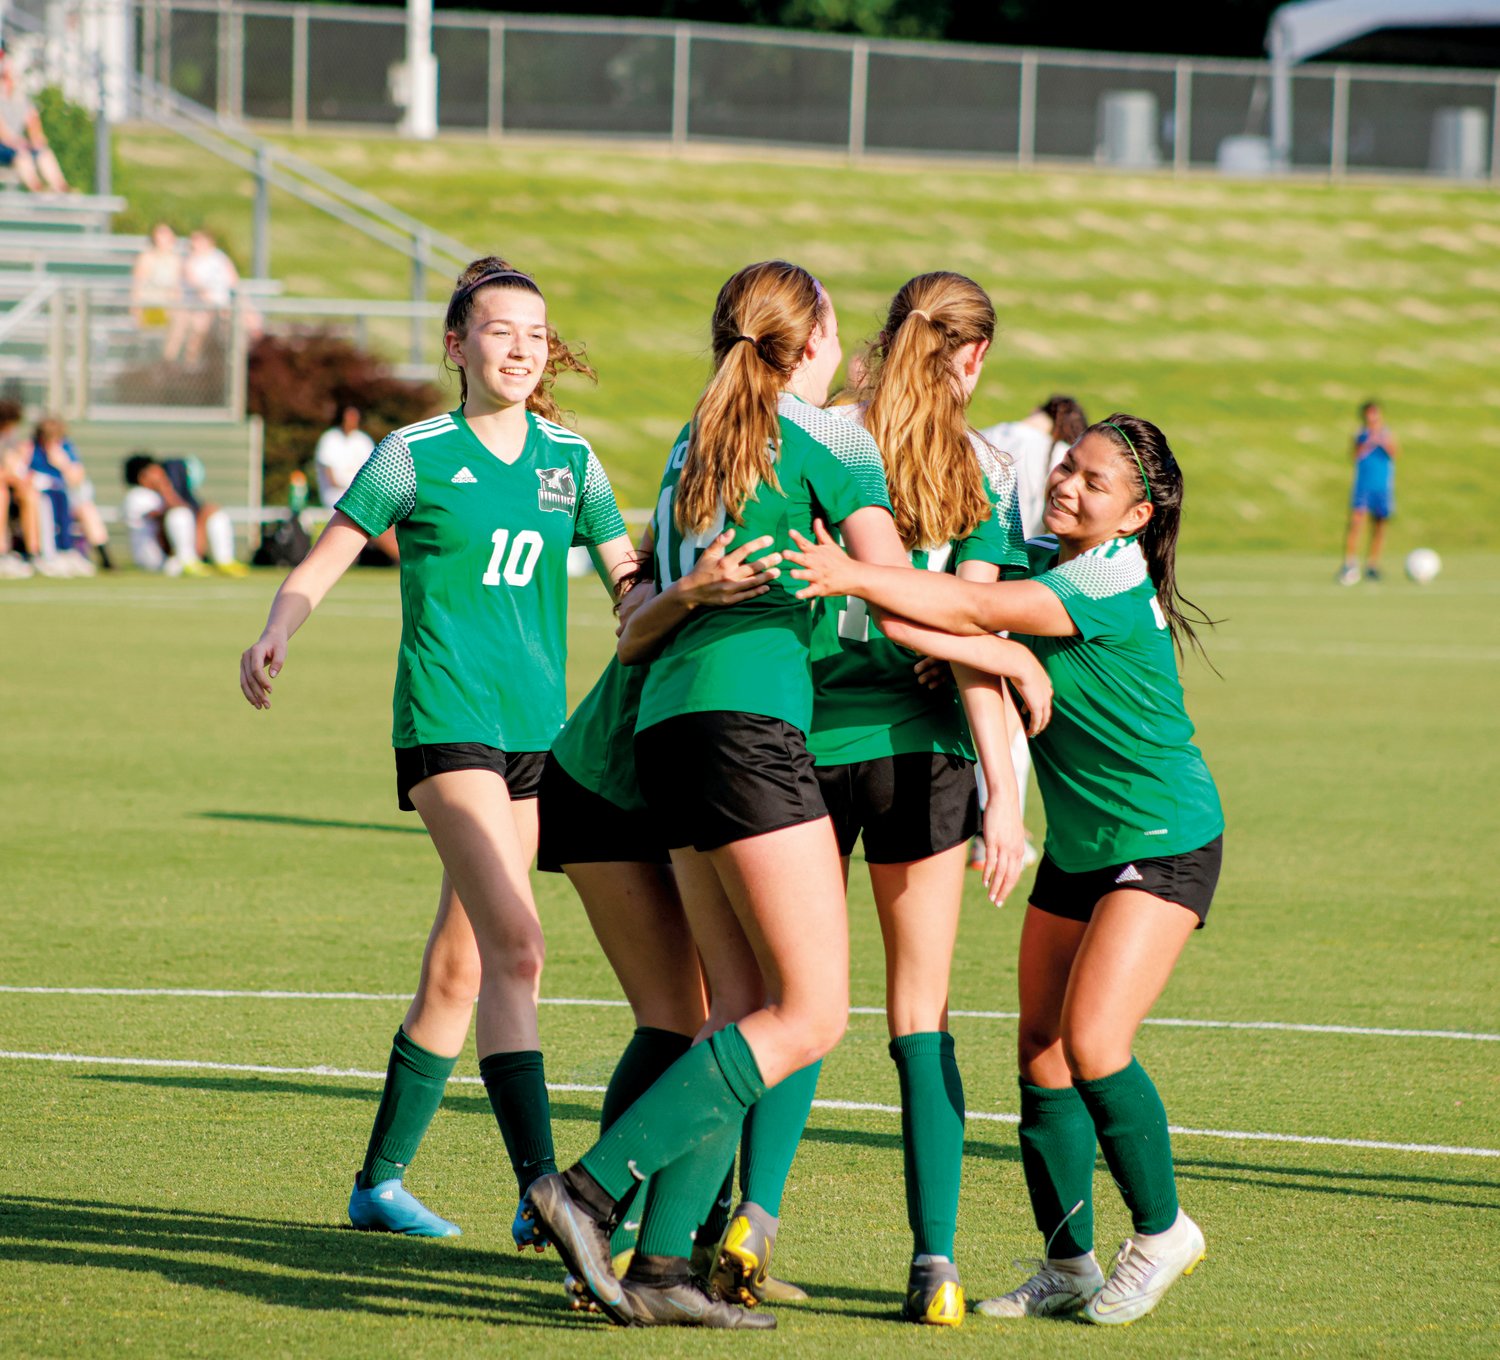 The Woods Charter women's soccer team celebrates with a group hug after sophomore Caroline Mitchell scored one of her two goals in the Wolves' 6-0 win over the Perquimans Pirates in the 4th round of the NCHSAA 1A playoffs last Thursday in Cary. The Wolves are undefeated on the season at 18-0-2.